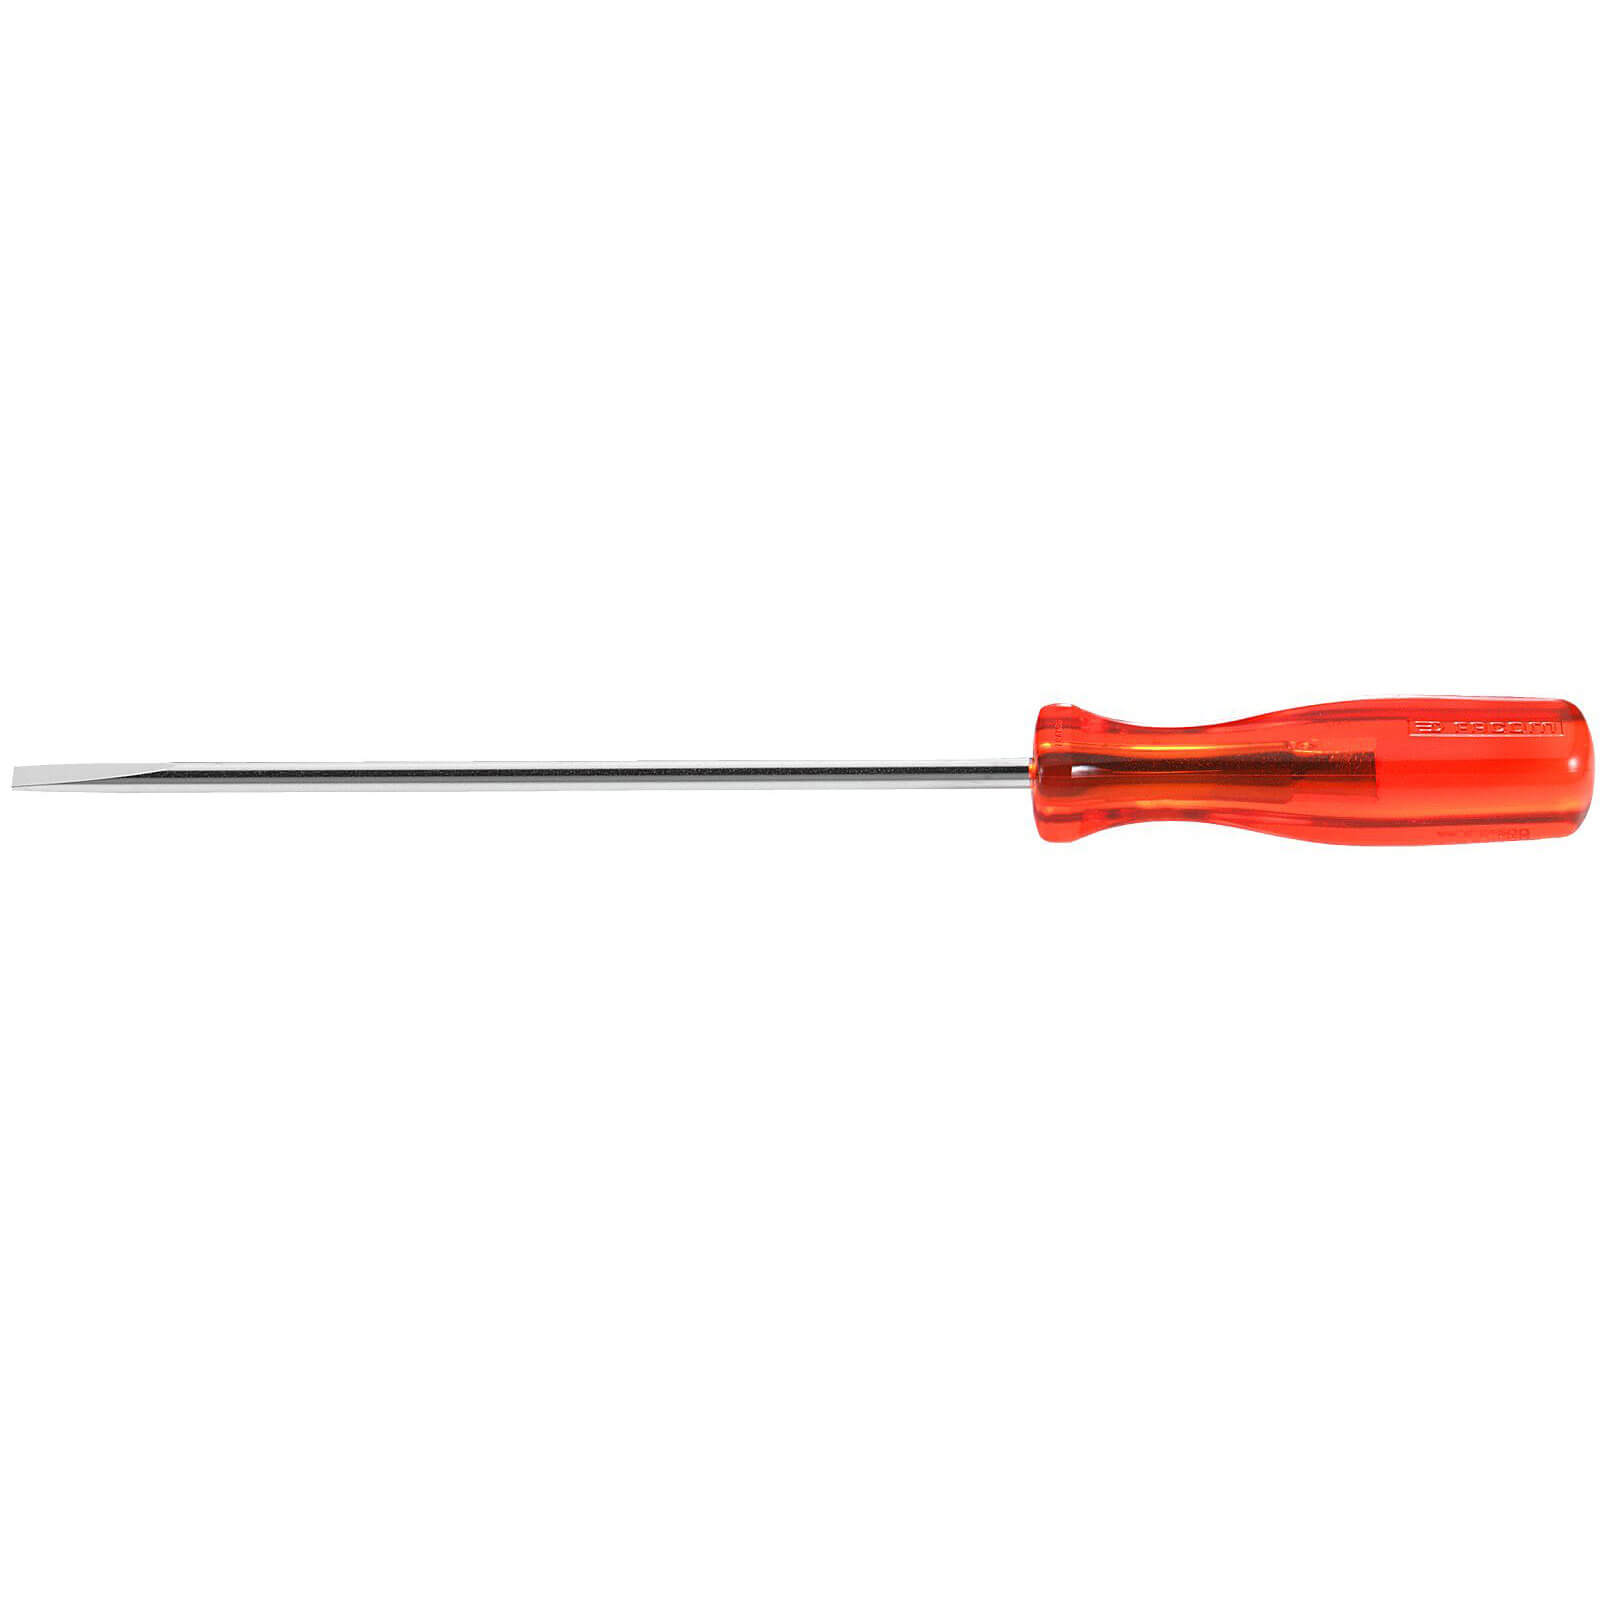 Image of Facom Isoryl Parallel Slotted Screwdriver 3.5mm 75mm